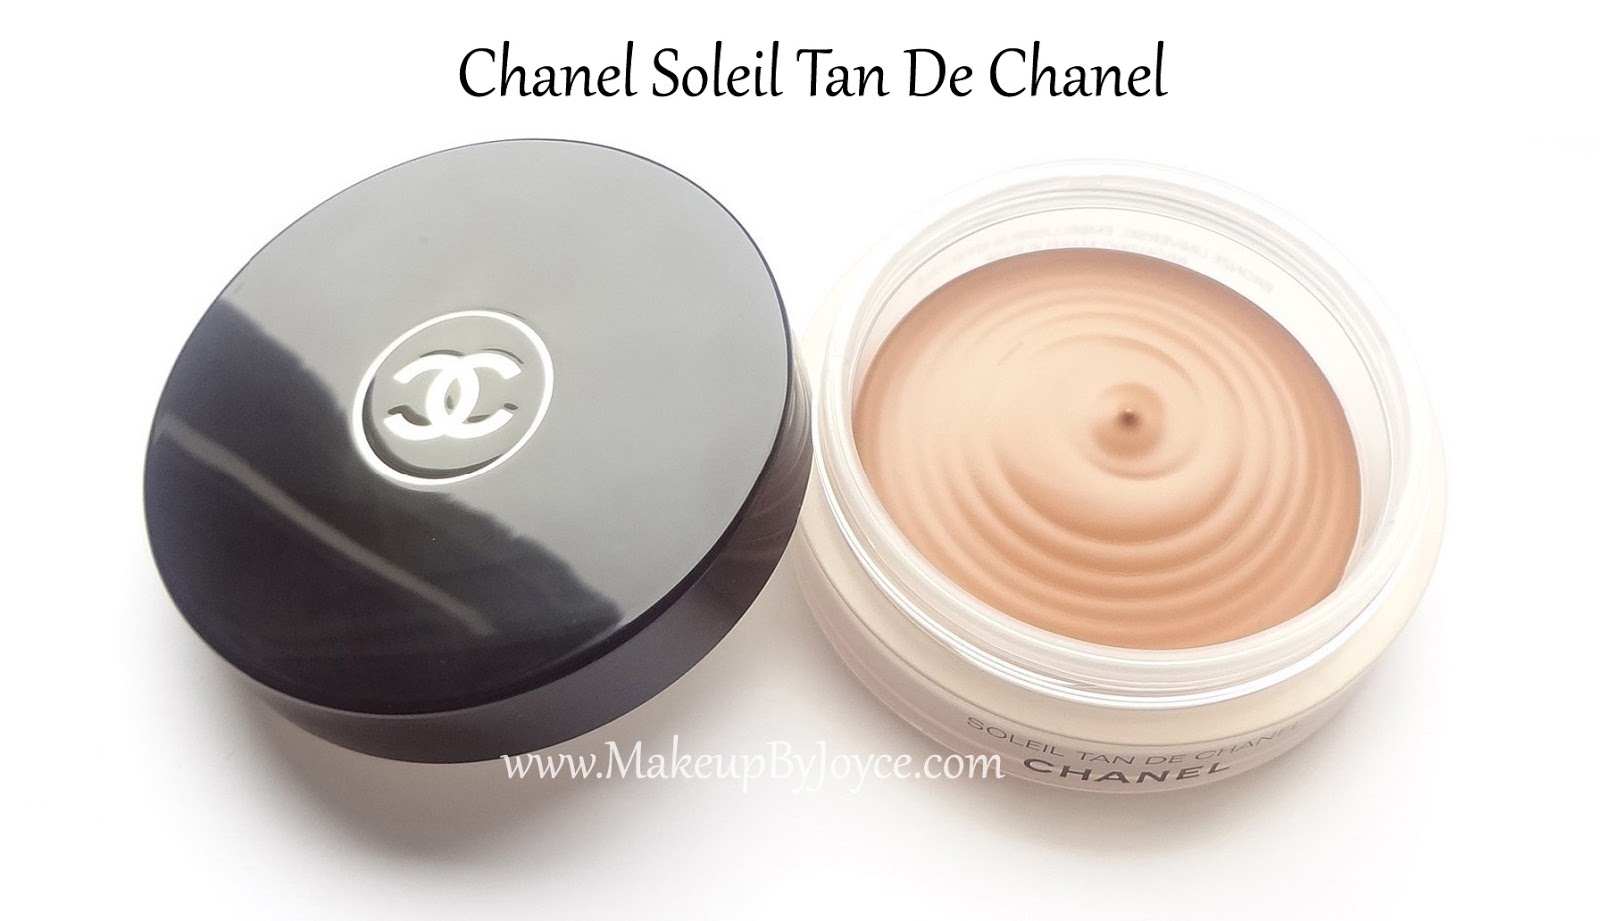 ❤ MakeupByJoyce ❤** !: Swatches + Review - Chanel Soleil Tan De